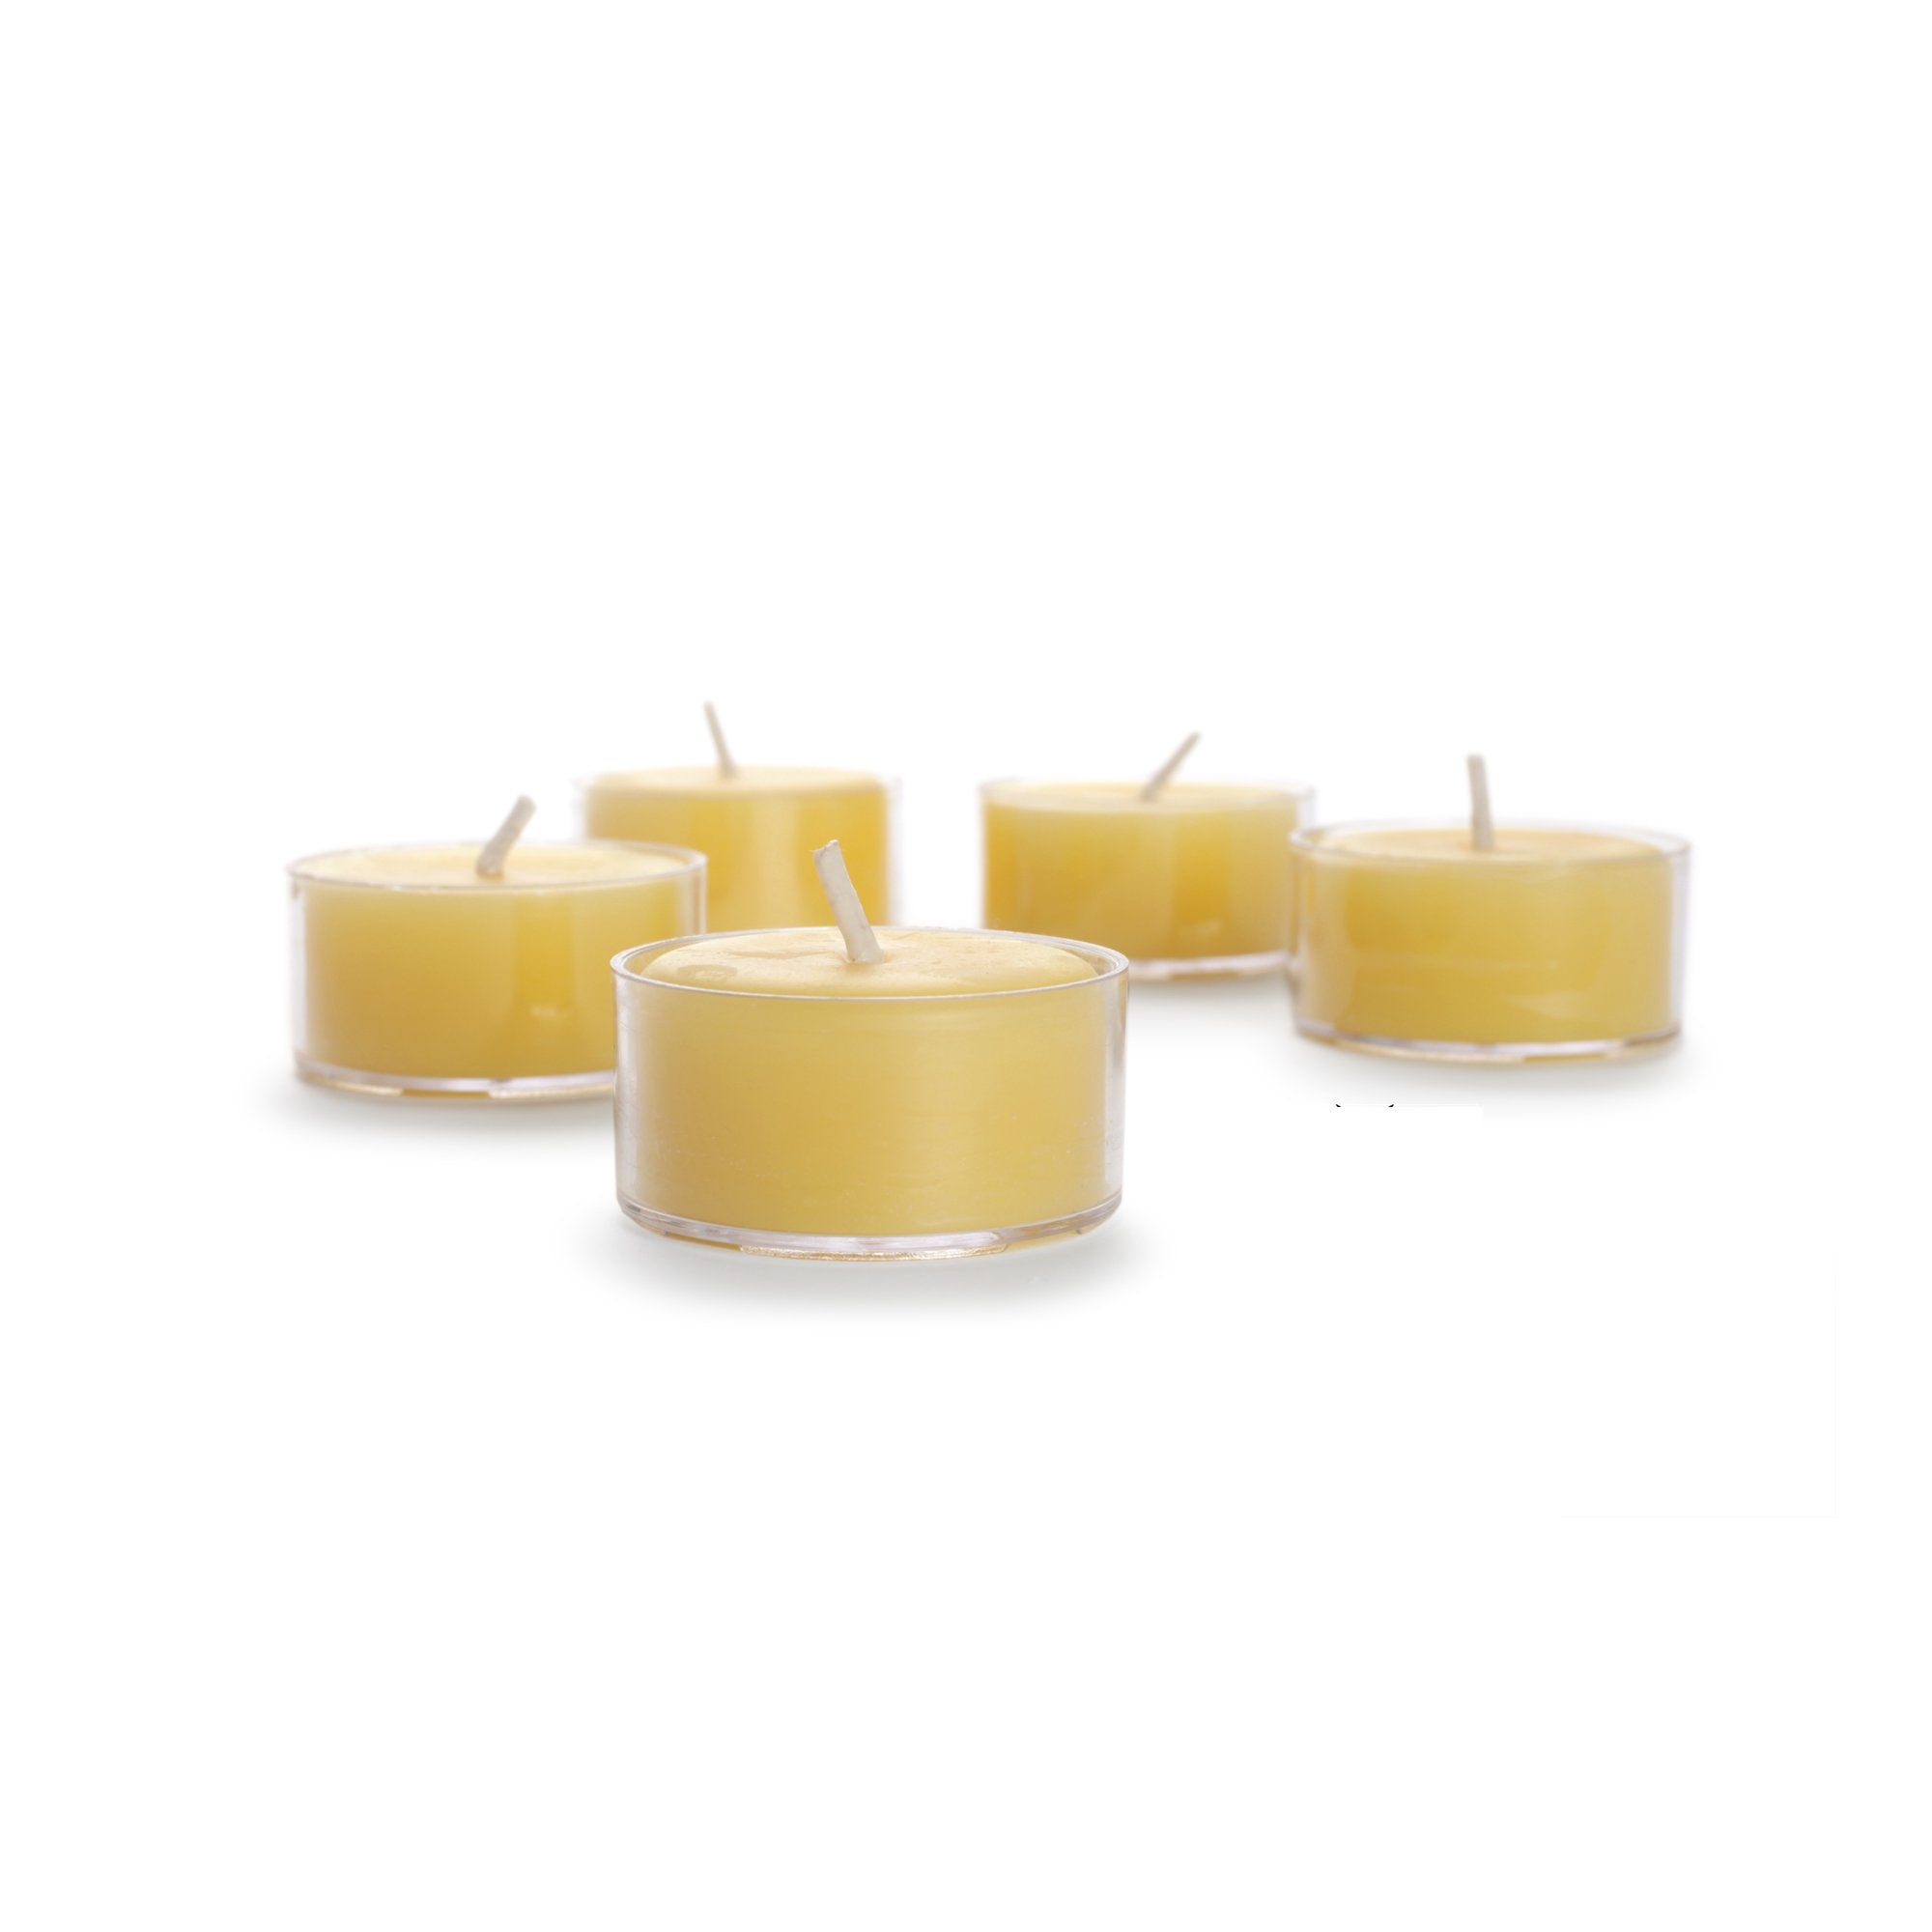 Set of 5 glass tea lights.  naturally colored and aromatic, infused with the sweet, subtle scent of honey. 